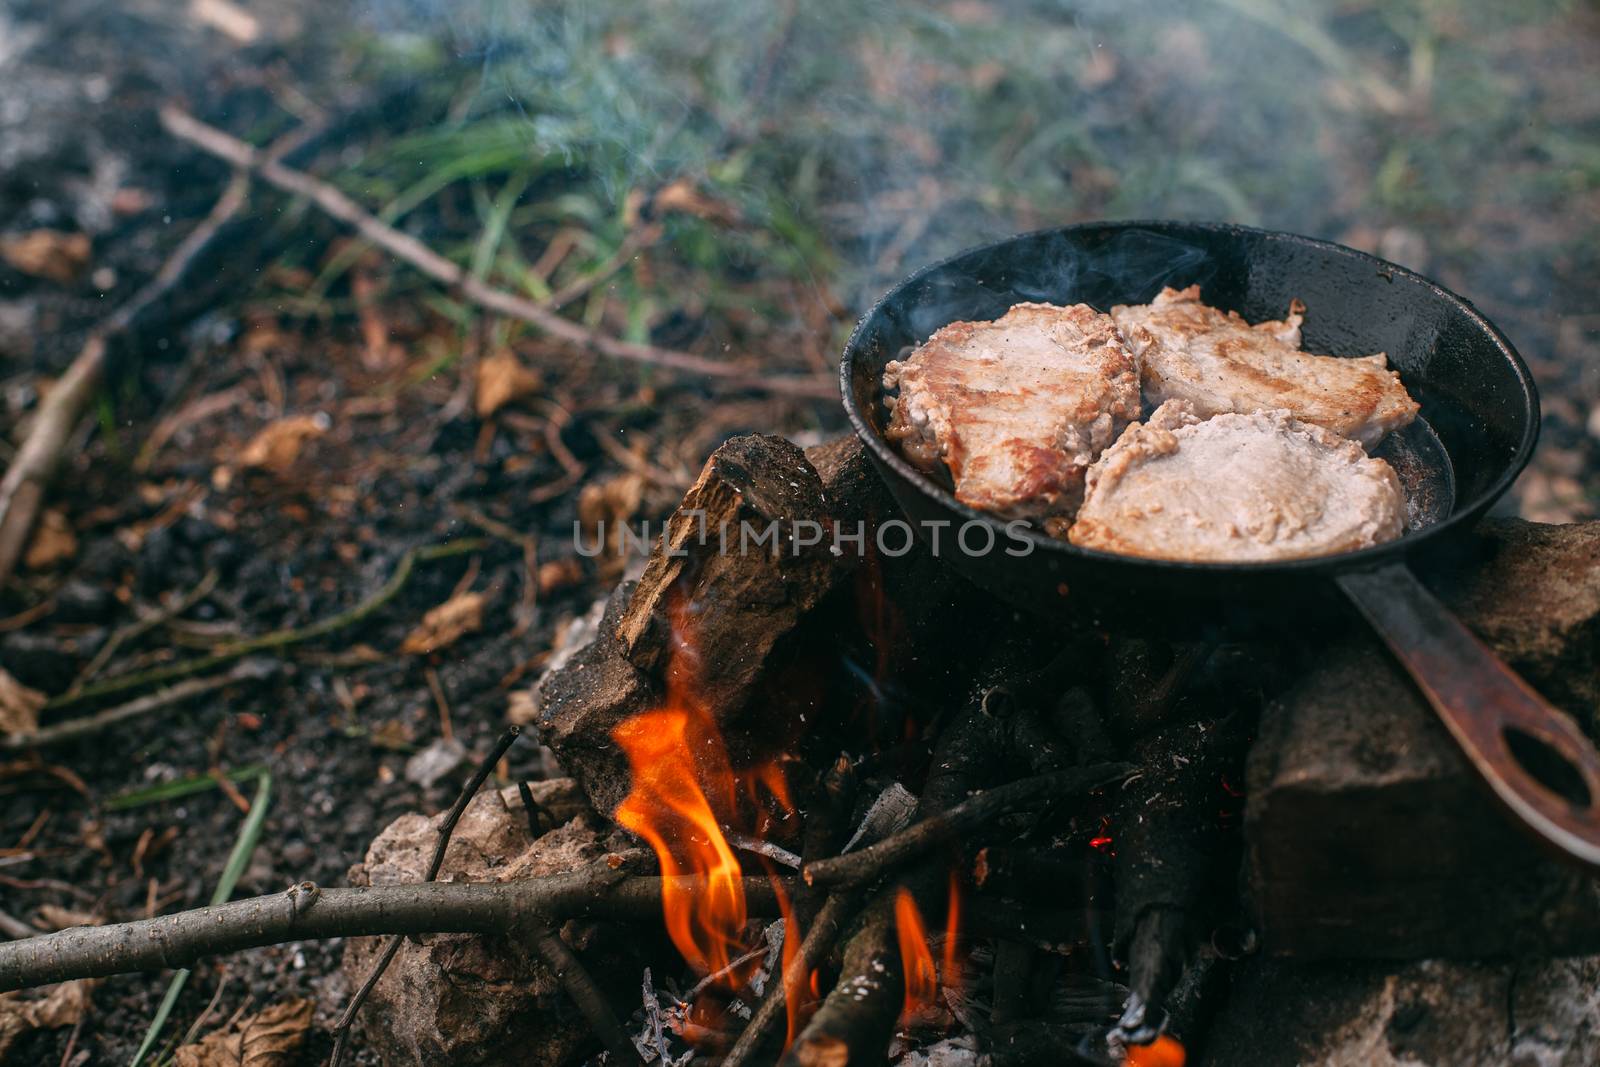 Frying meat in a pan over an open fire with leek. Steak in a pan on a fire. Cooking in nature. Picnic. Grill on fire.